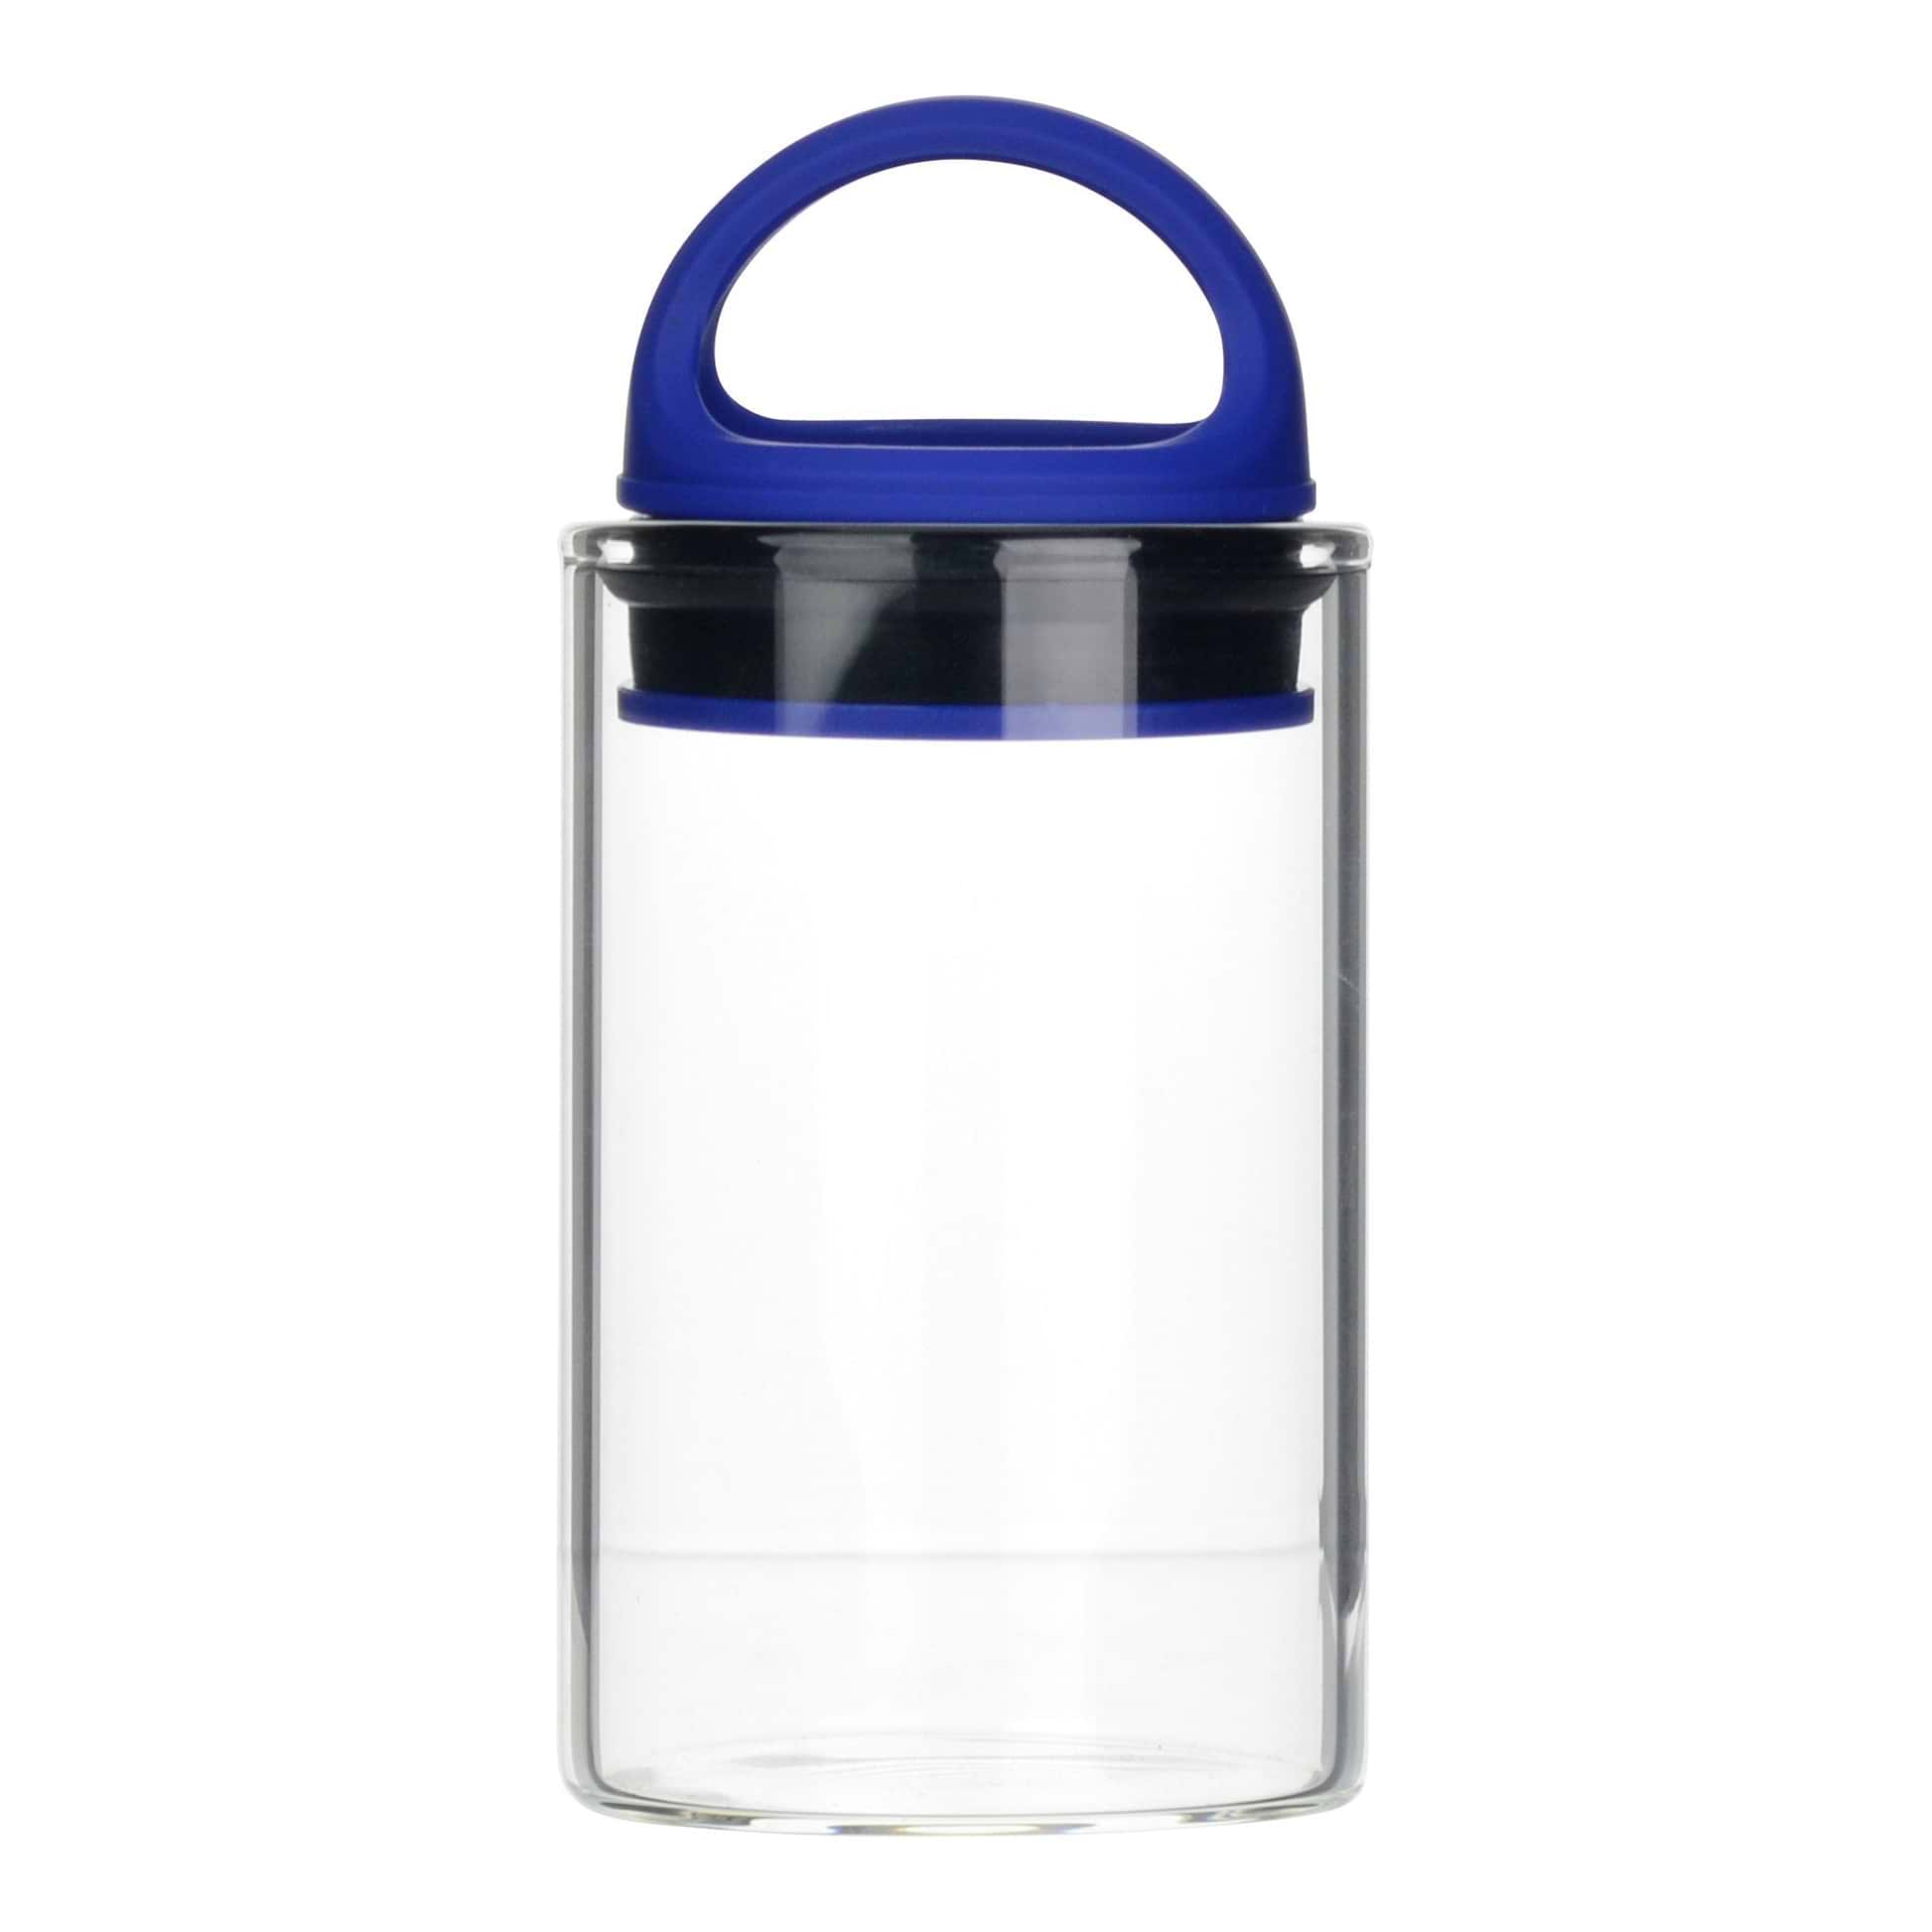 Blue clear glass stash jar storage container vacuum seal easy-to-carry with curved handle